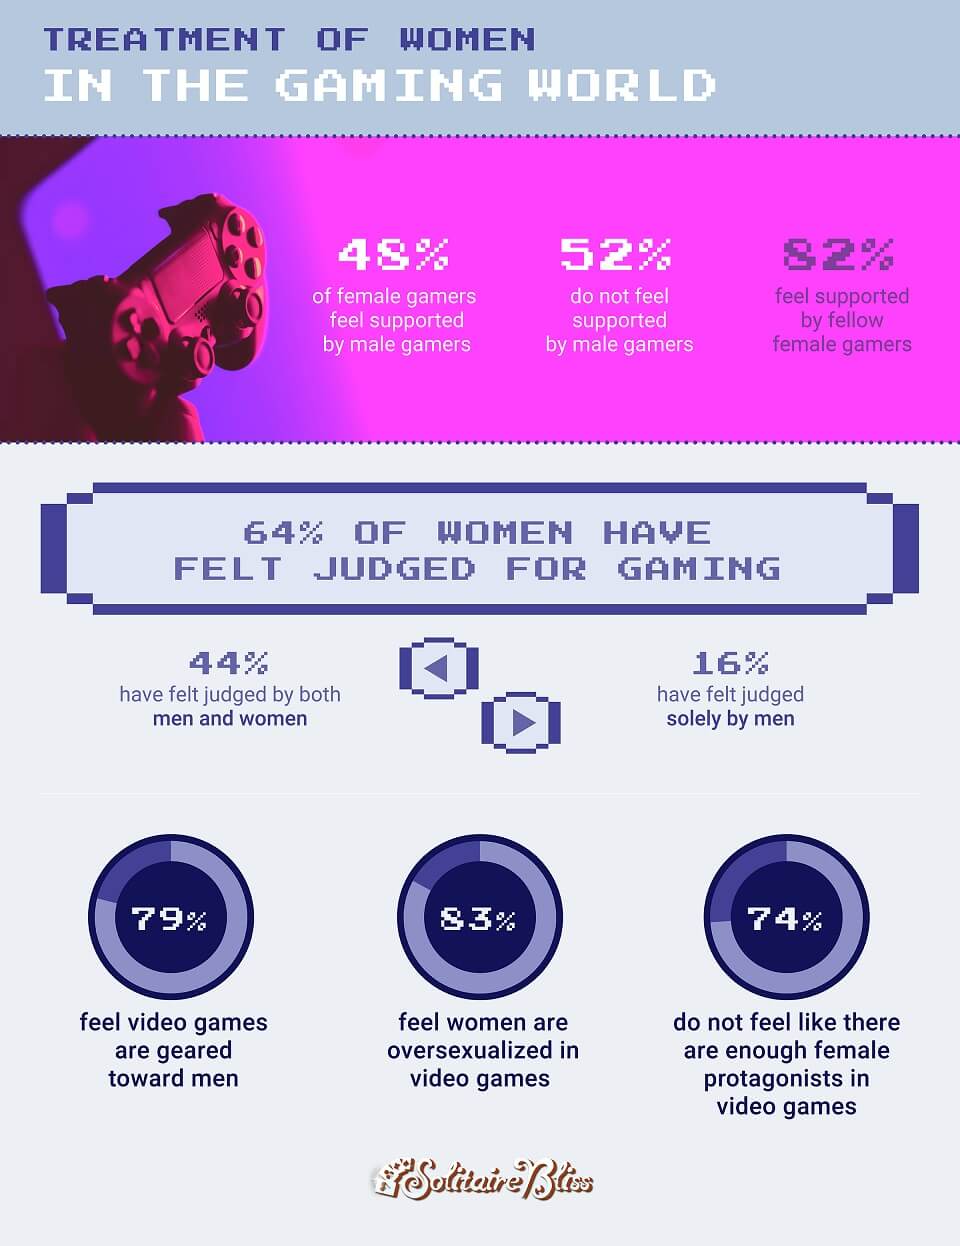 Treatment of Women in the Gaming World - study from solitairebliss.com